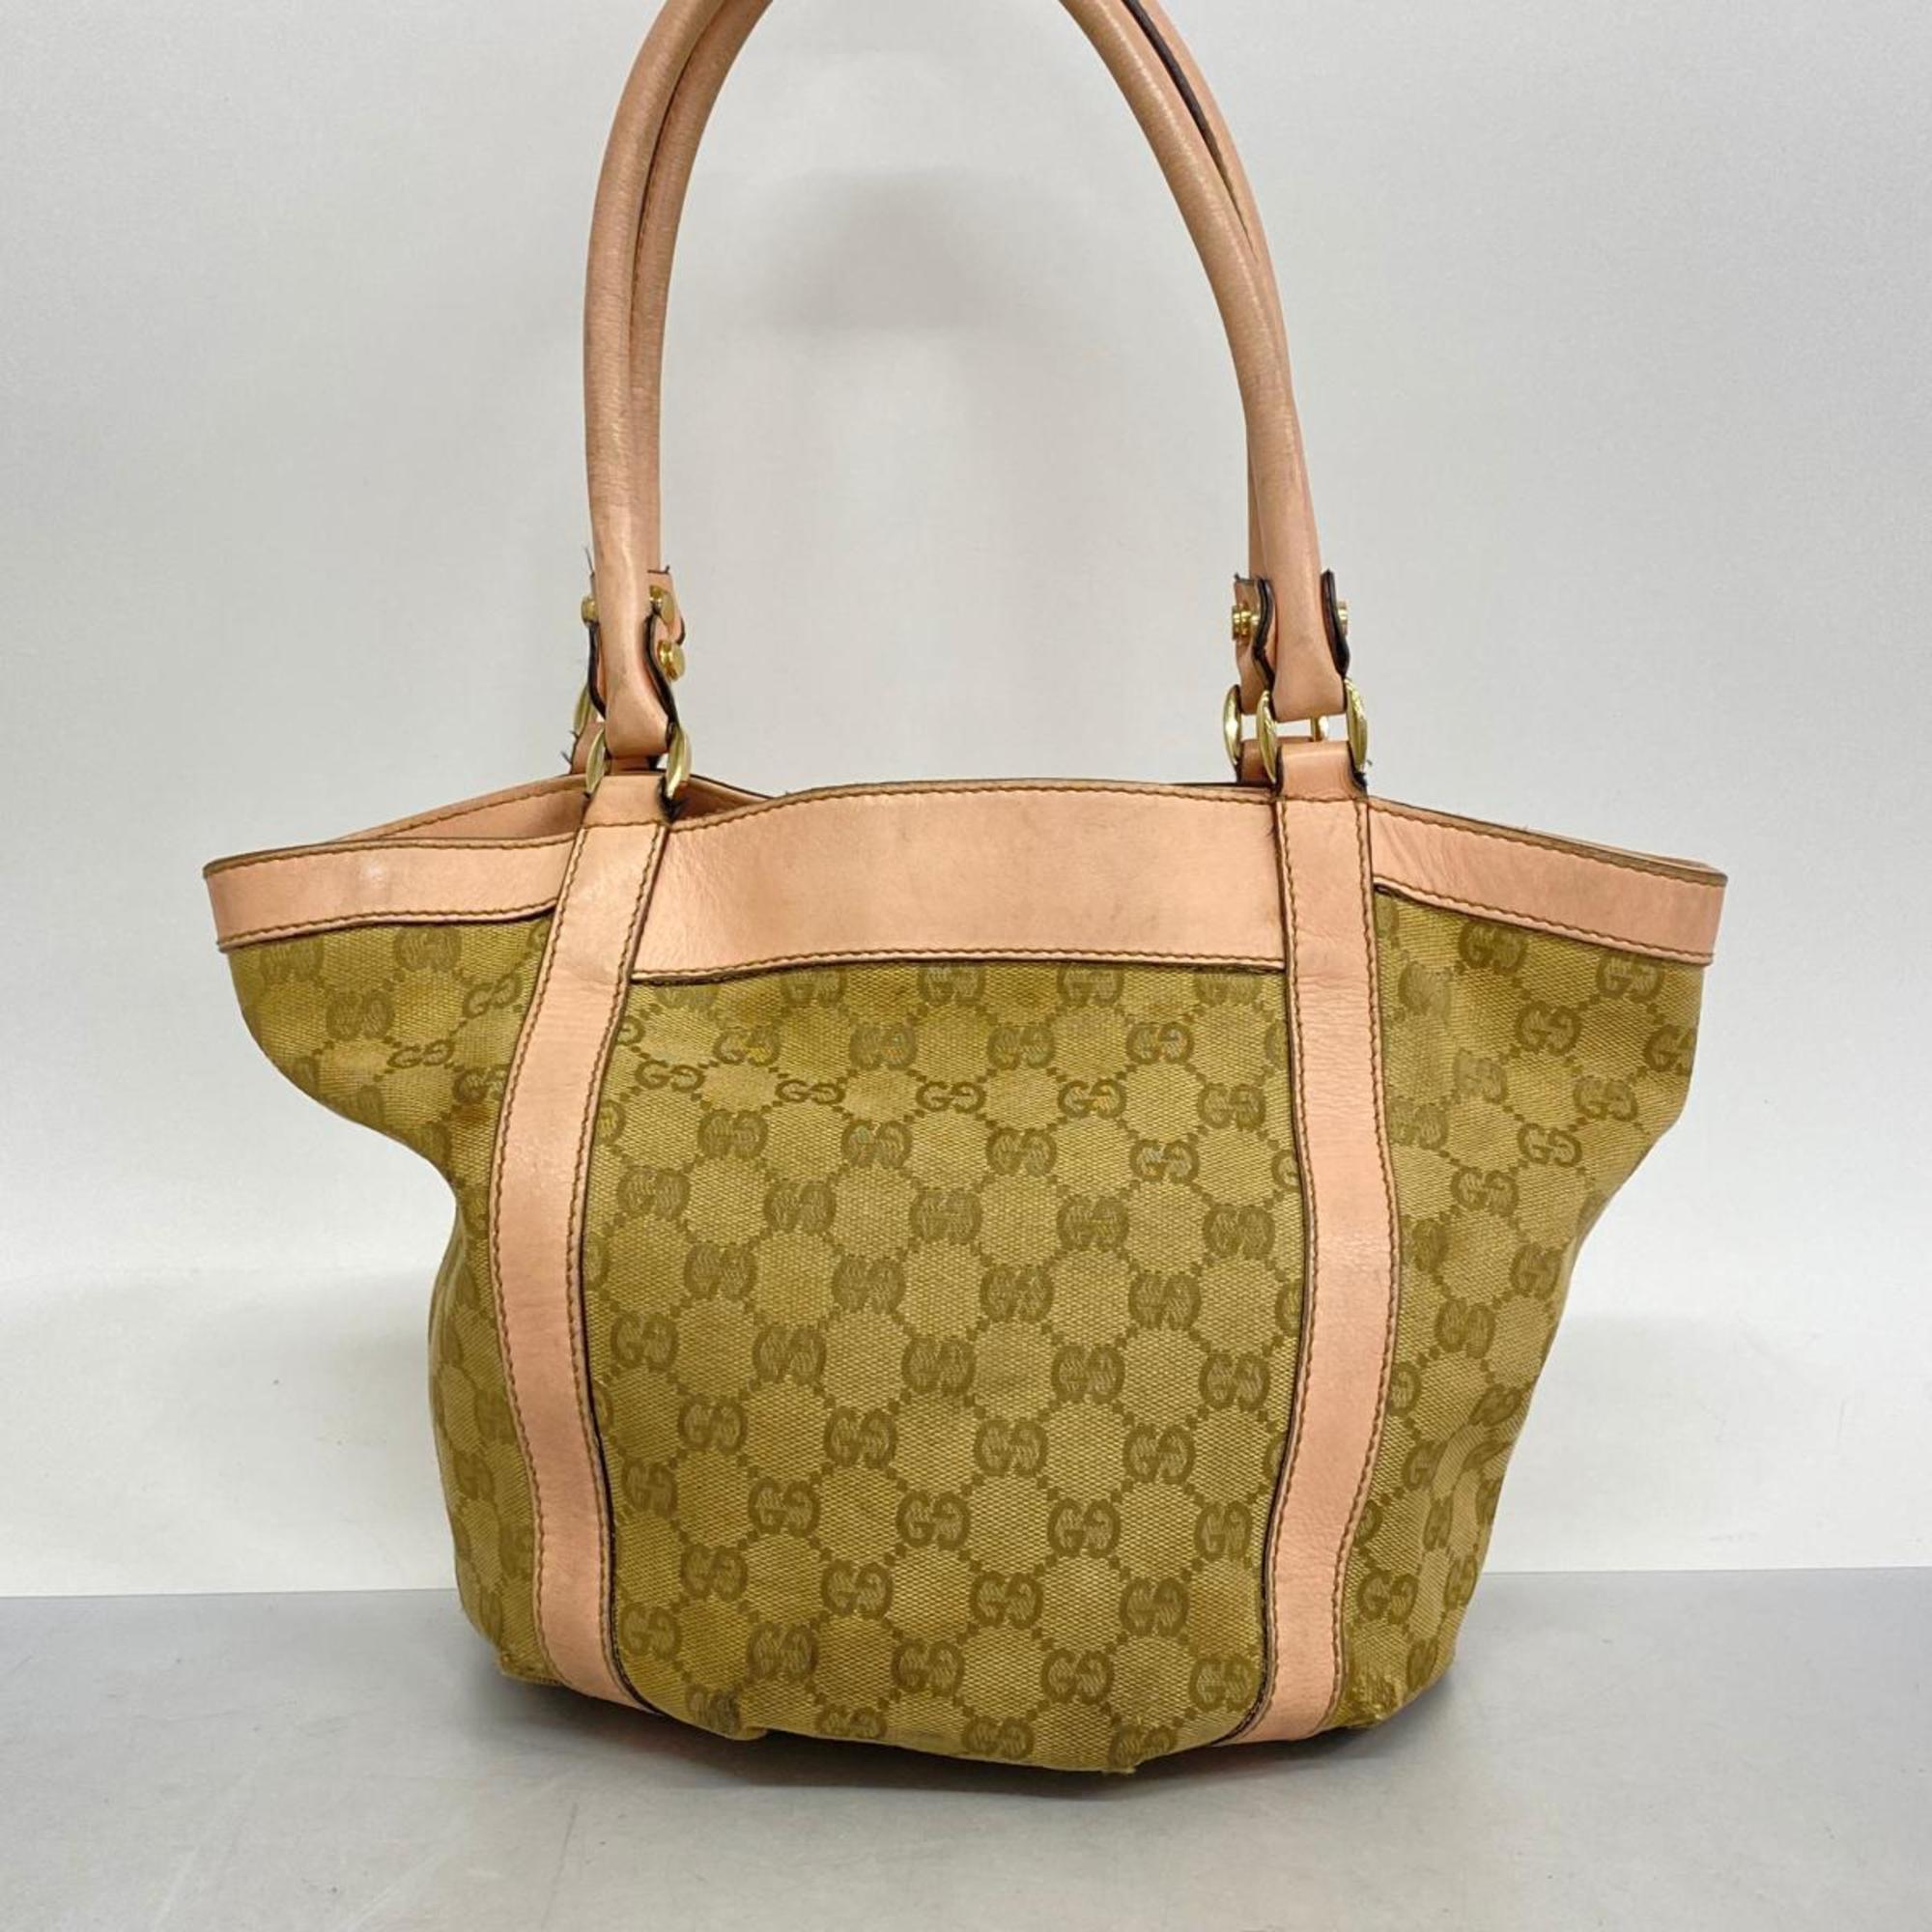 Gucci Tote Bag GG Canvas 211983 Leather Pink Beige Champagne Women's